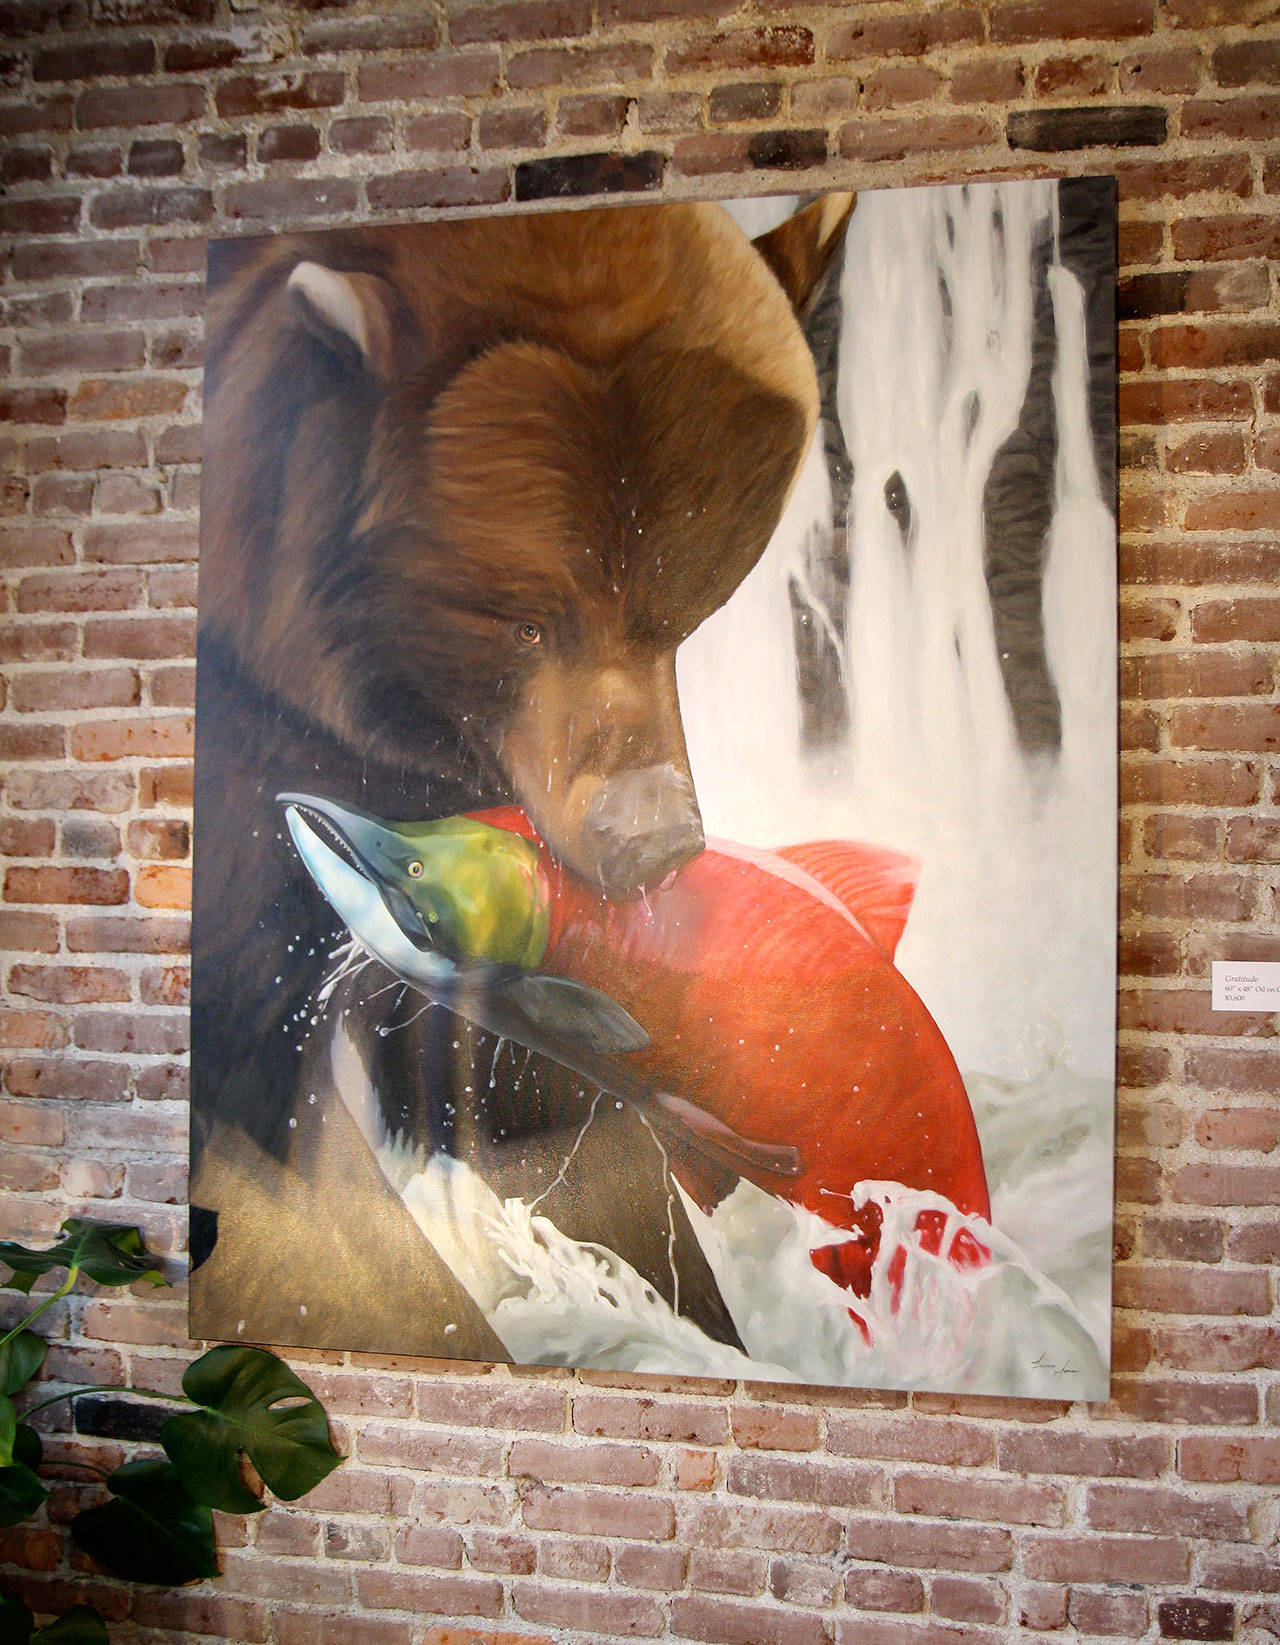 Michael Lang | Grays Harbor News Group                                A painting of a bear with a salmon in its mouth hangs on a wall at the Moore Gallery in Montesano.